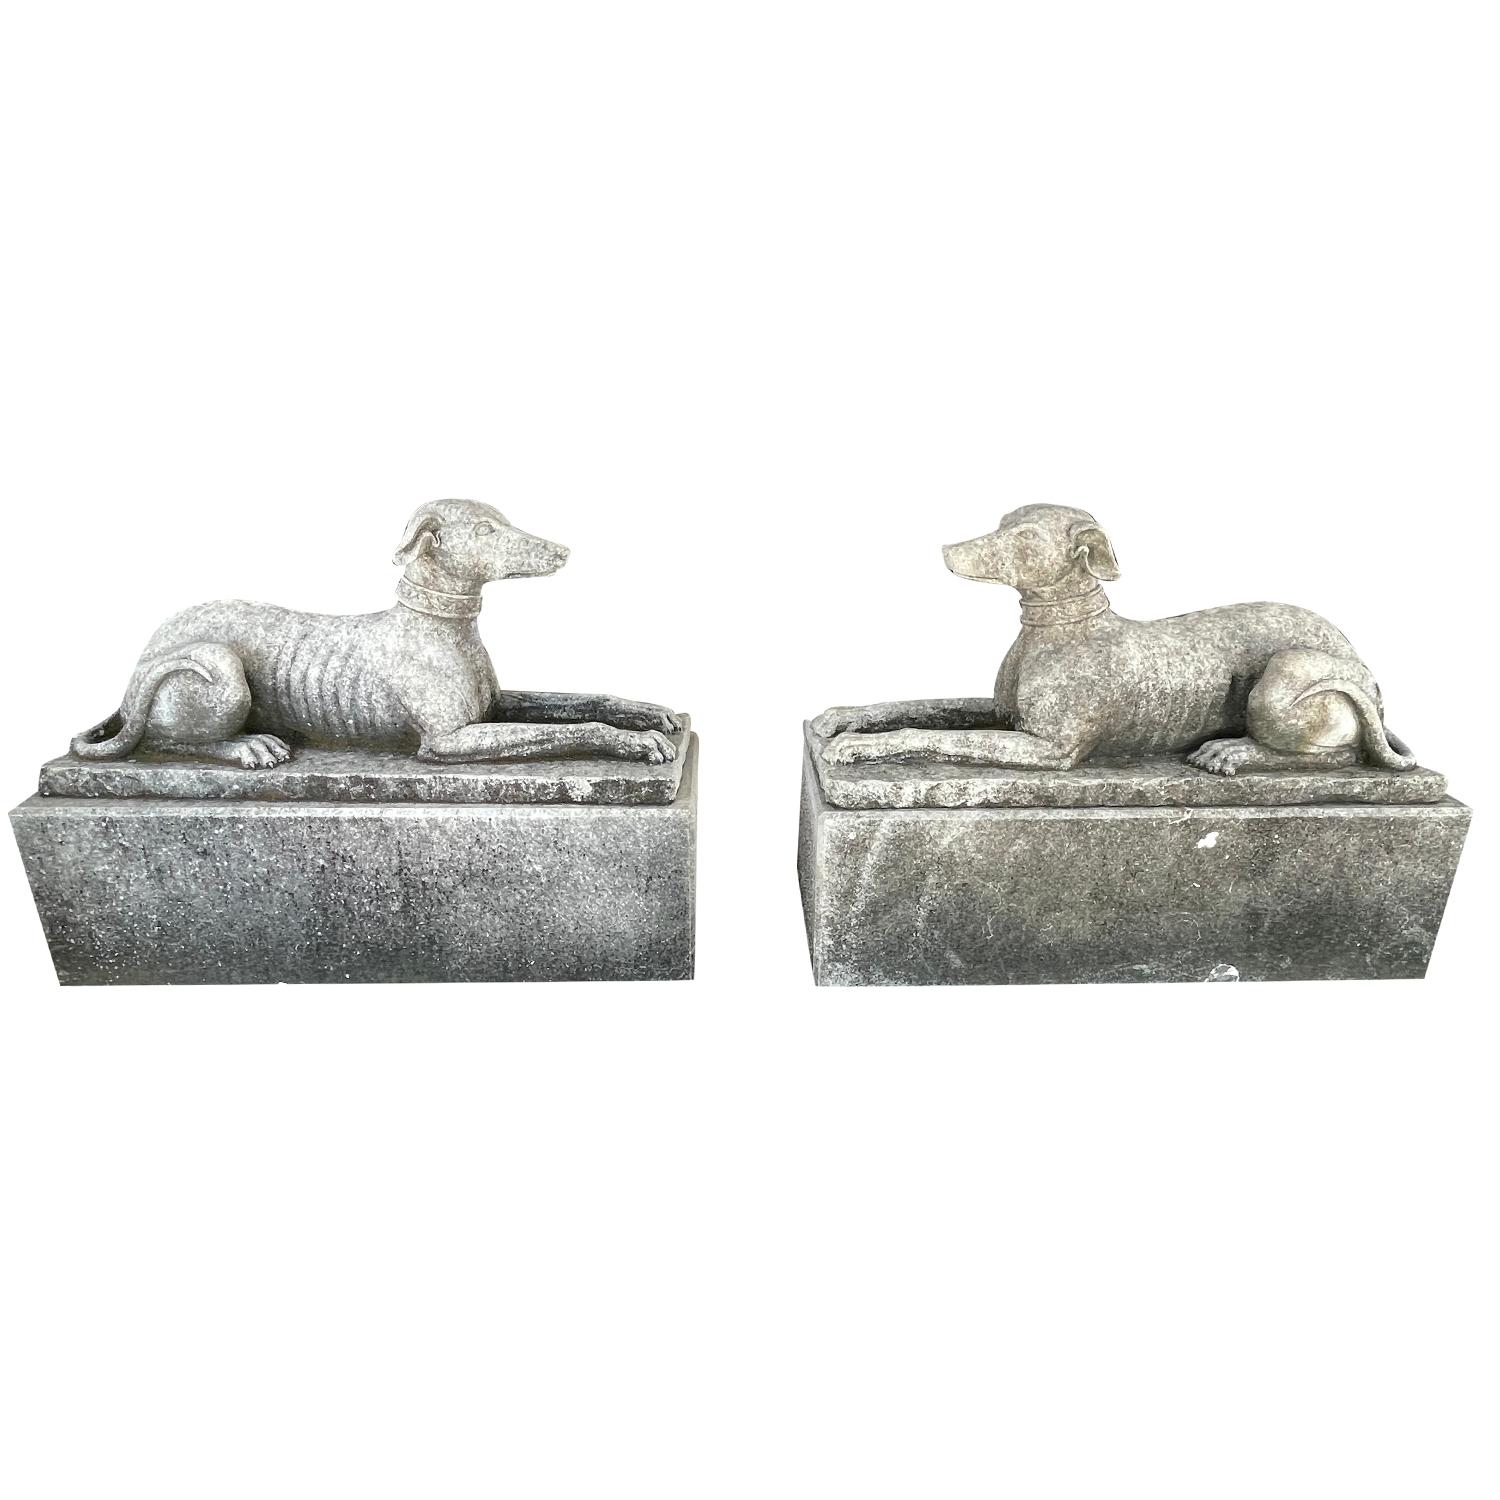 Hand-Carved 20th Century British Vintage Pair of Whippet Garden Limestone Statues For Sale